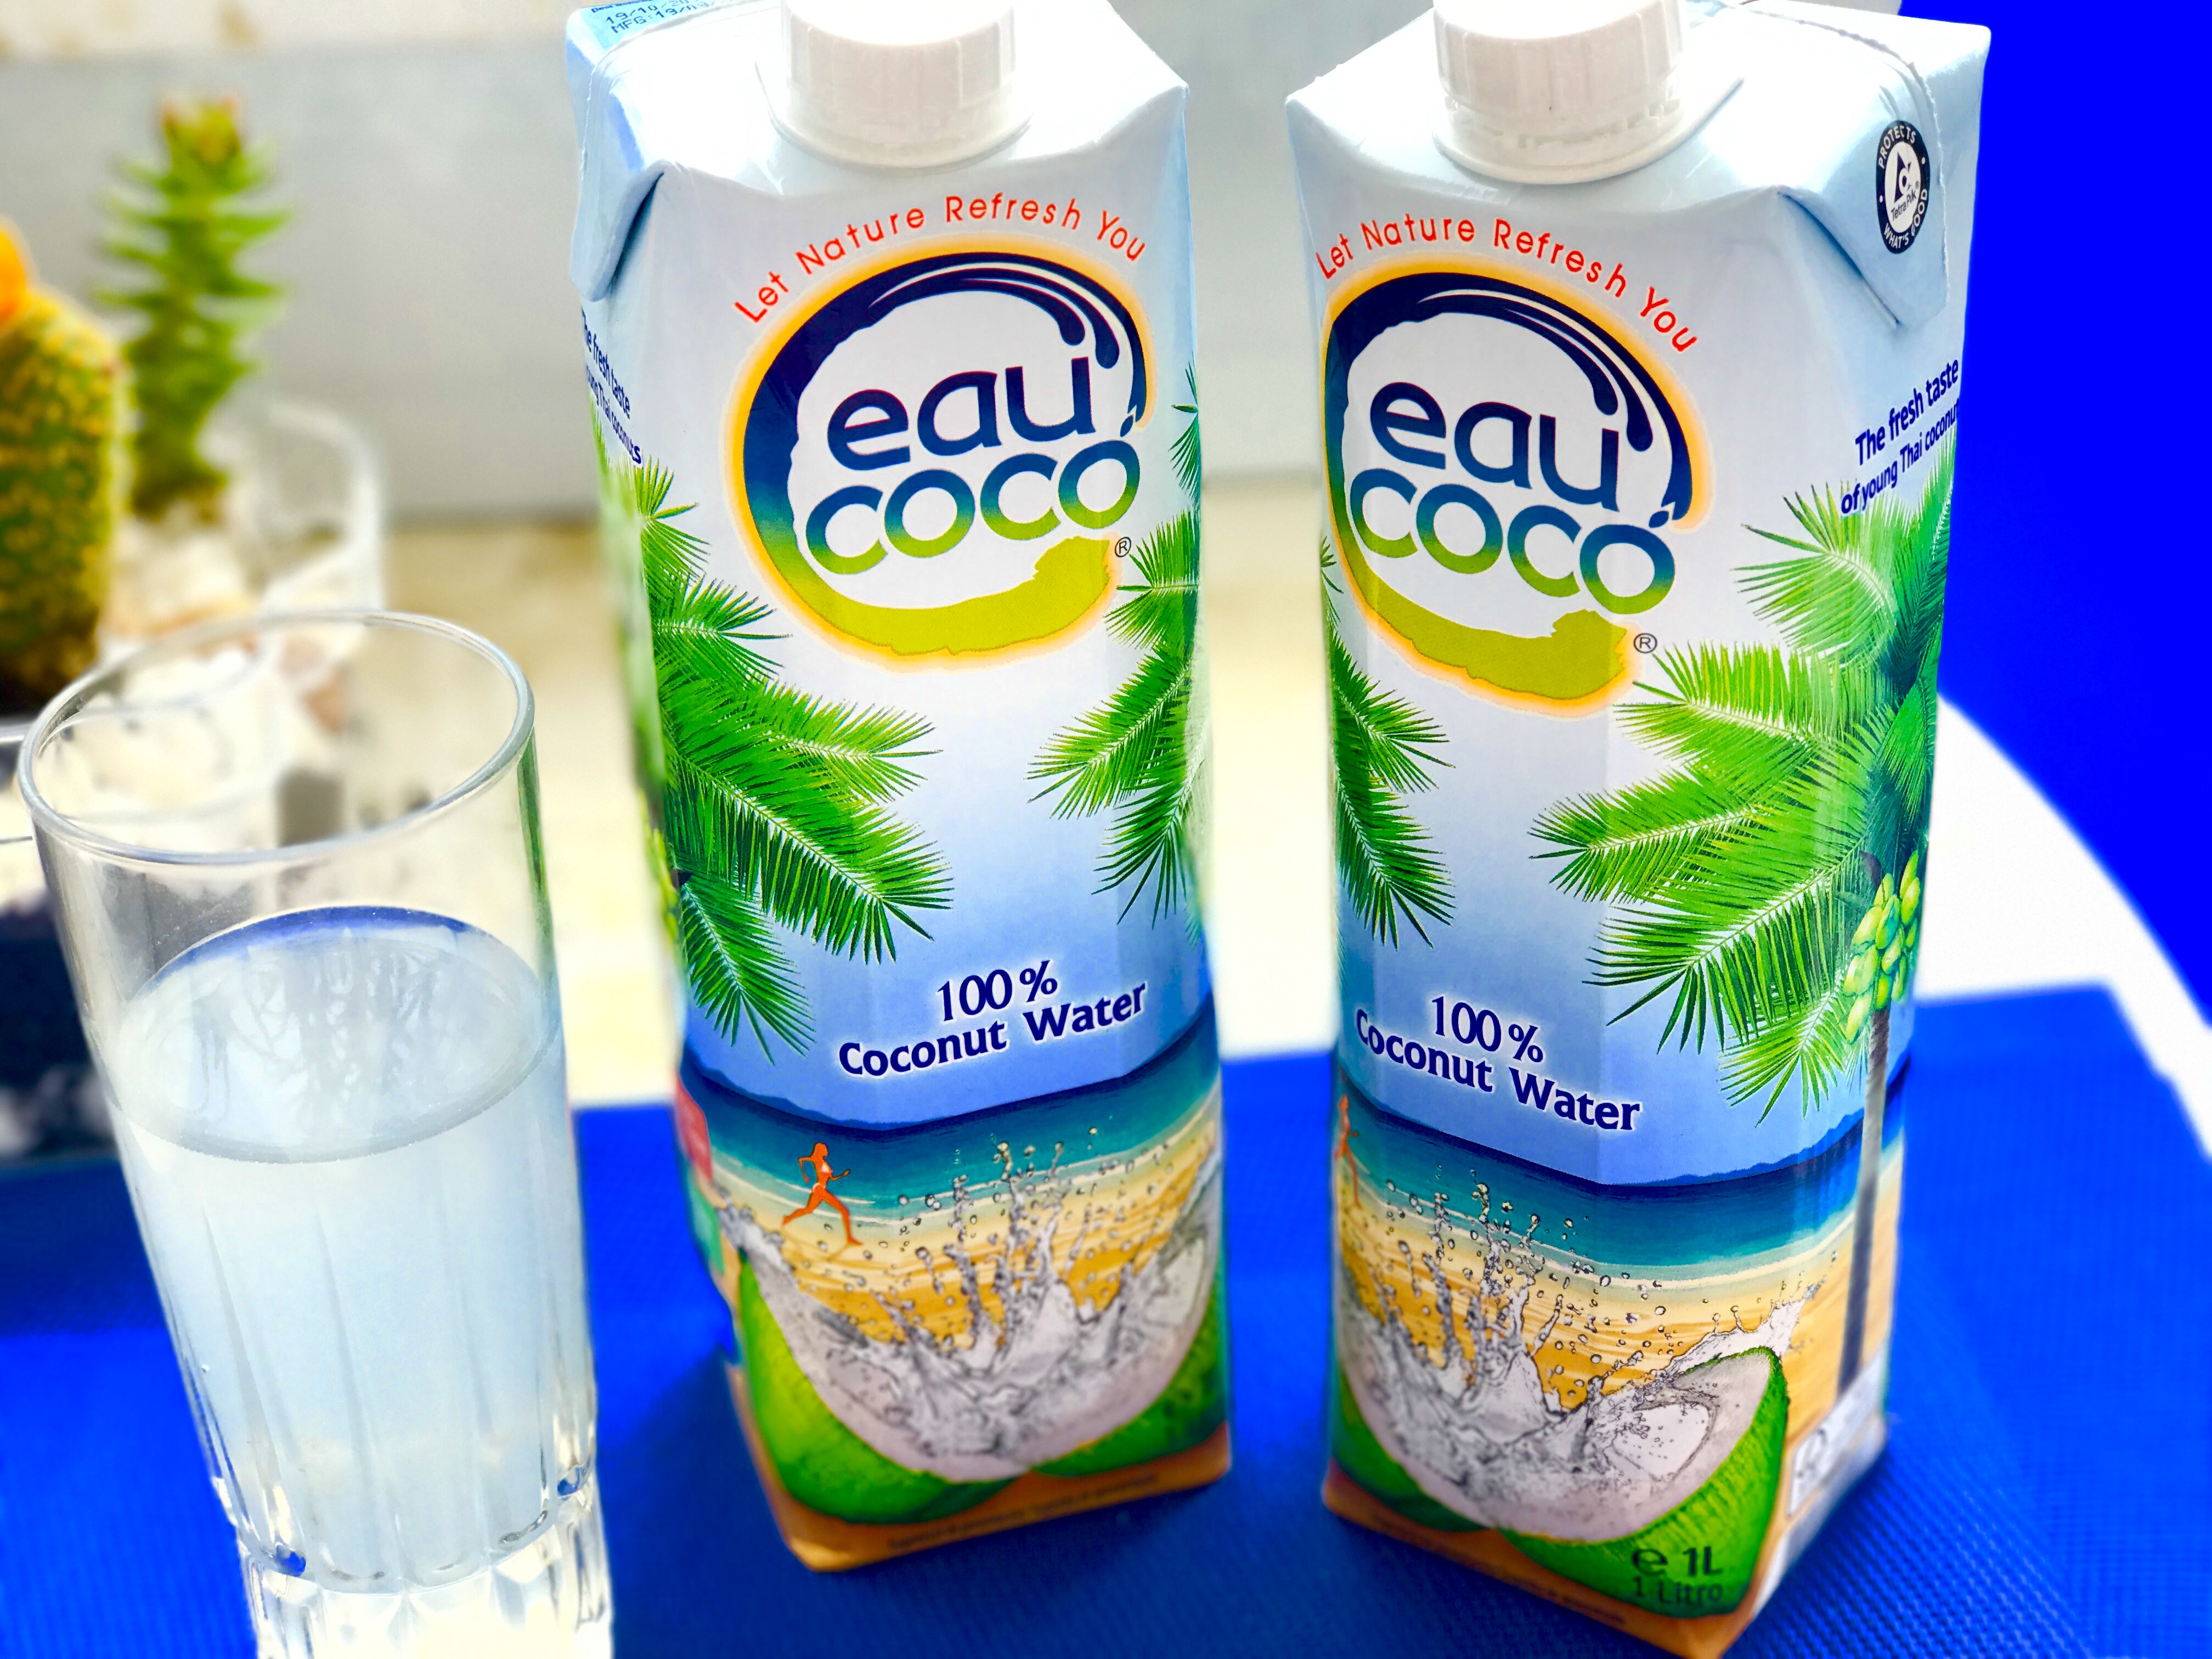 coconut water for health, hangover & weight loss?? why not